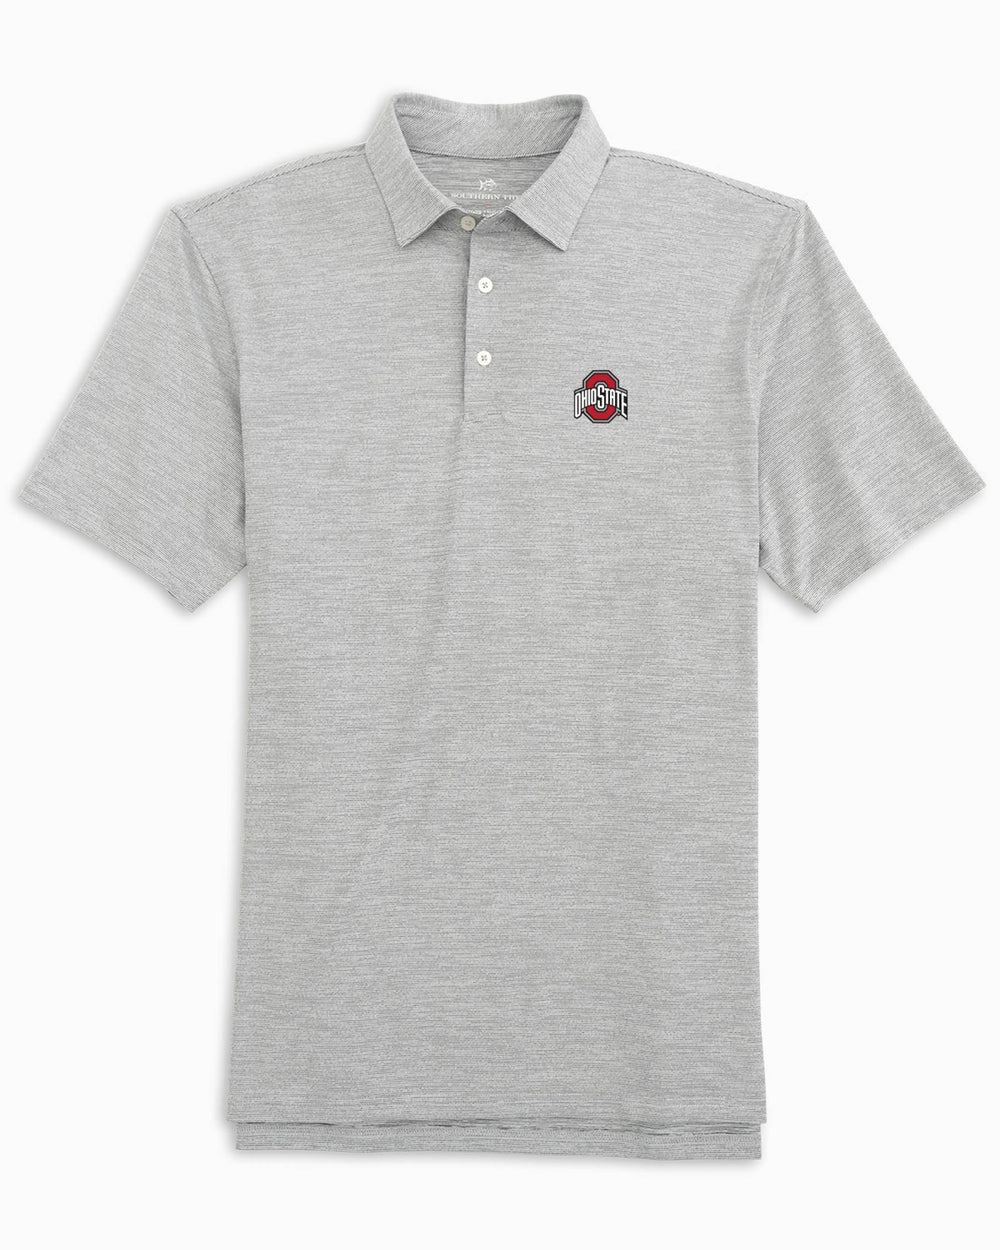 The front of the Ohio State Buckeyes Driver Spacedye Polo Shirt by Southern Tide - Black